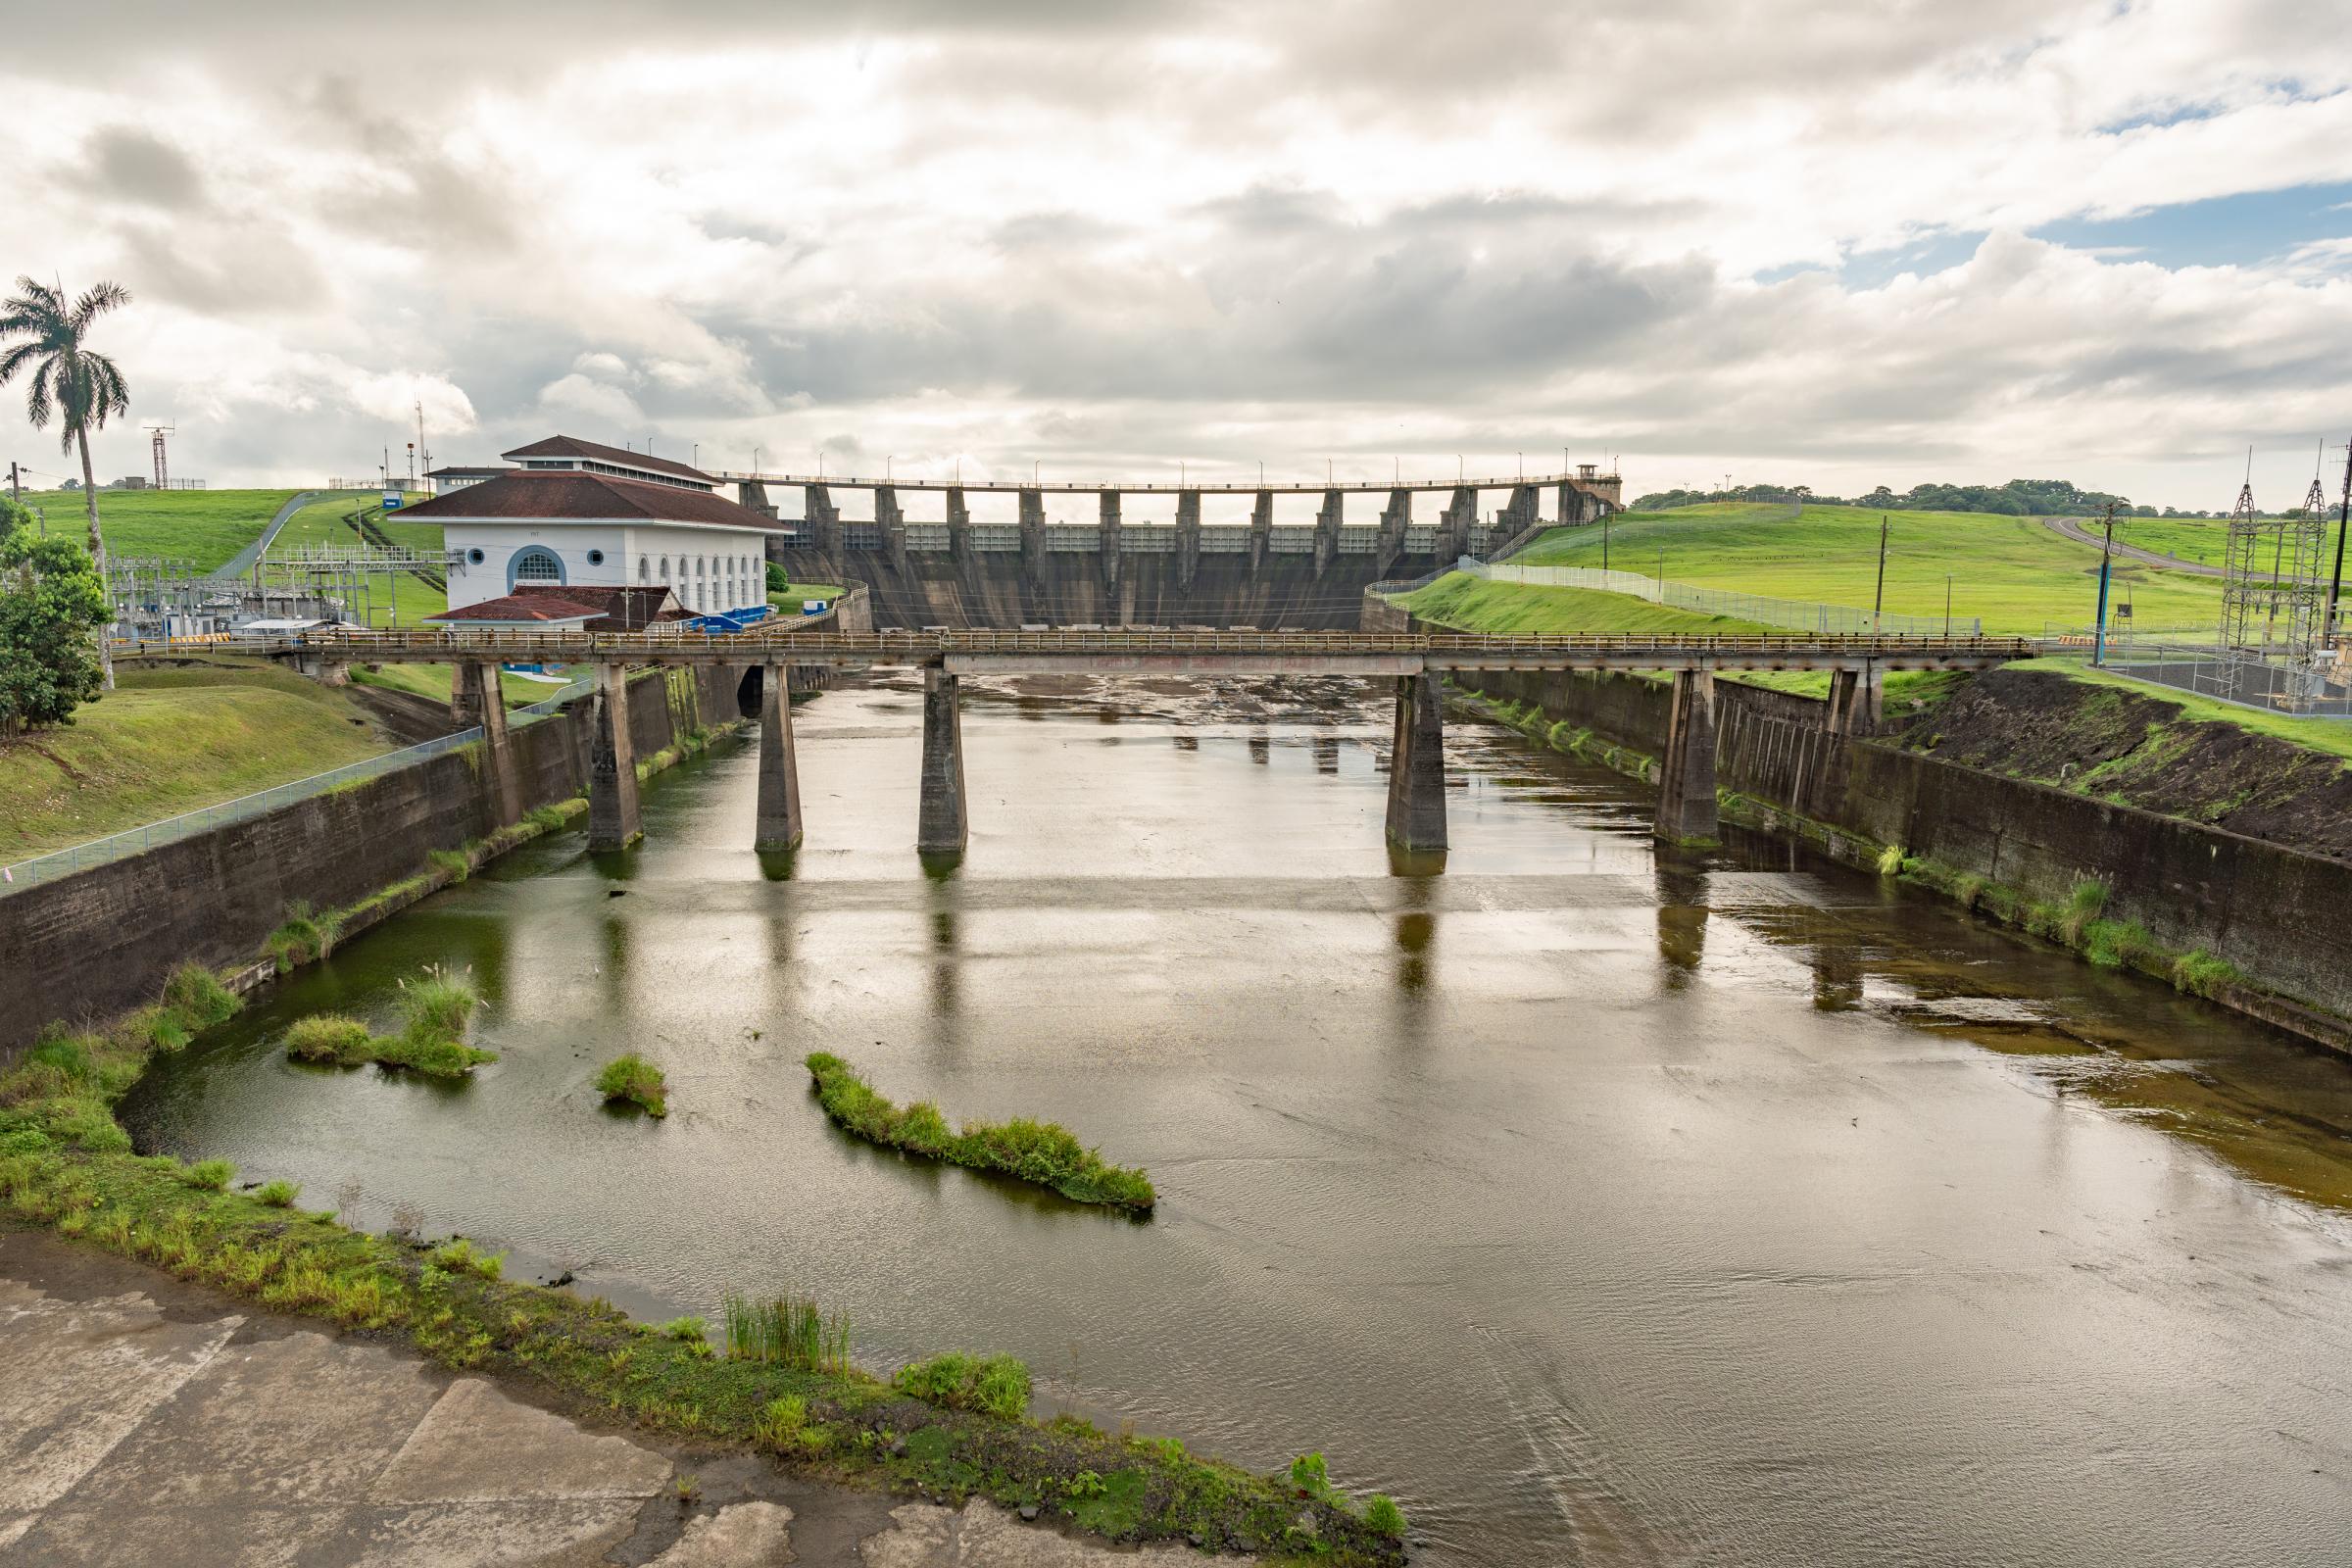 Bloomberg: Saving the Panama Canal Will Take Years and Cost Billions, If It’s Even Possible - water dam of the Gatún Lake, on the Atlantic side, near the Agua Clara Locks in Colón, on Monday,...